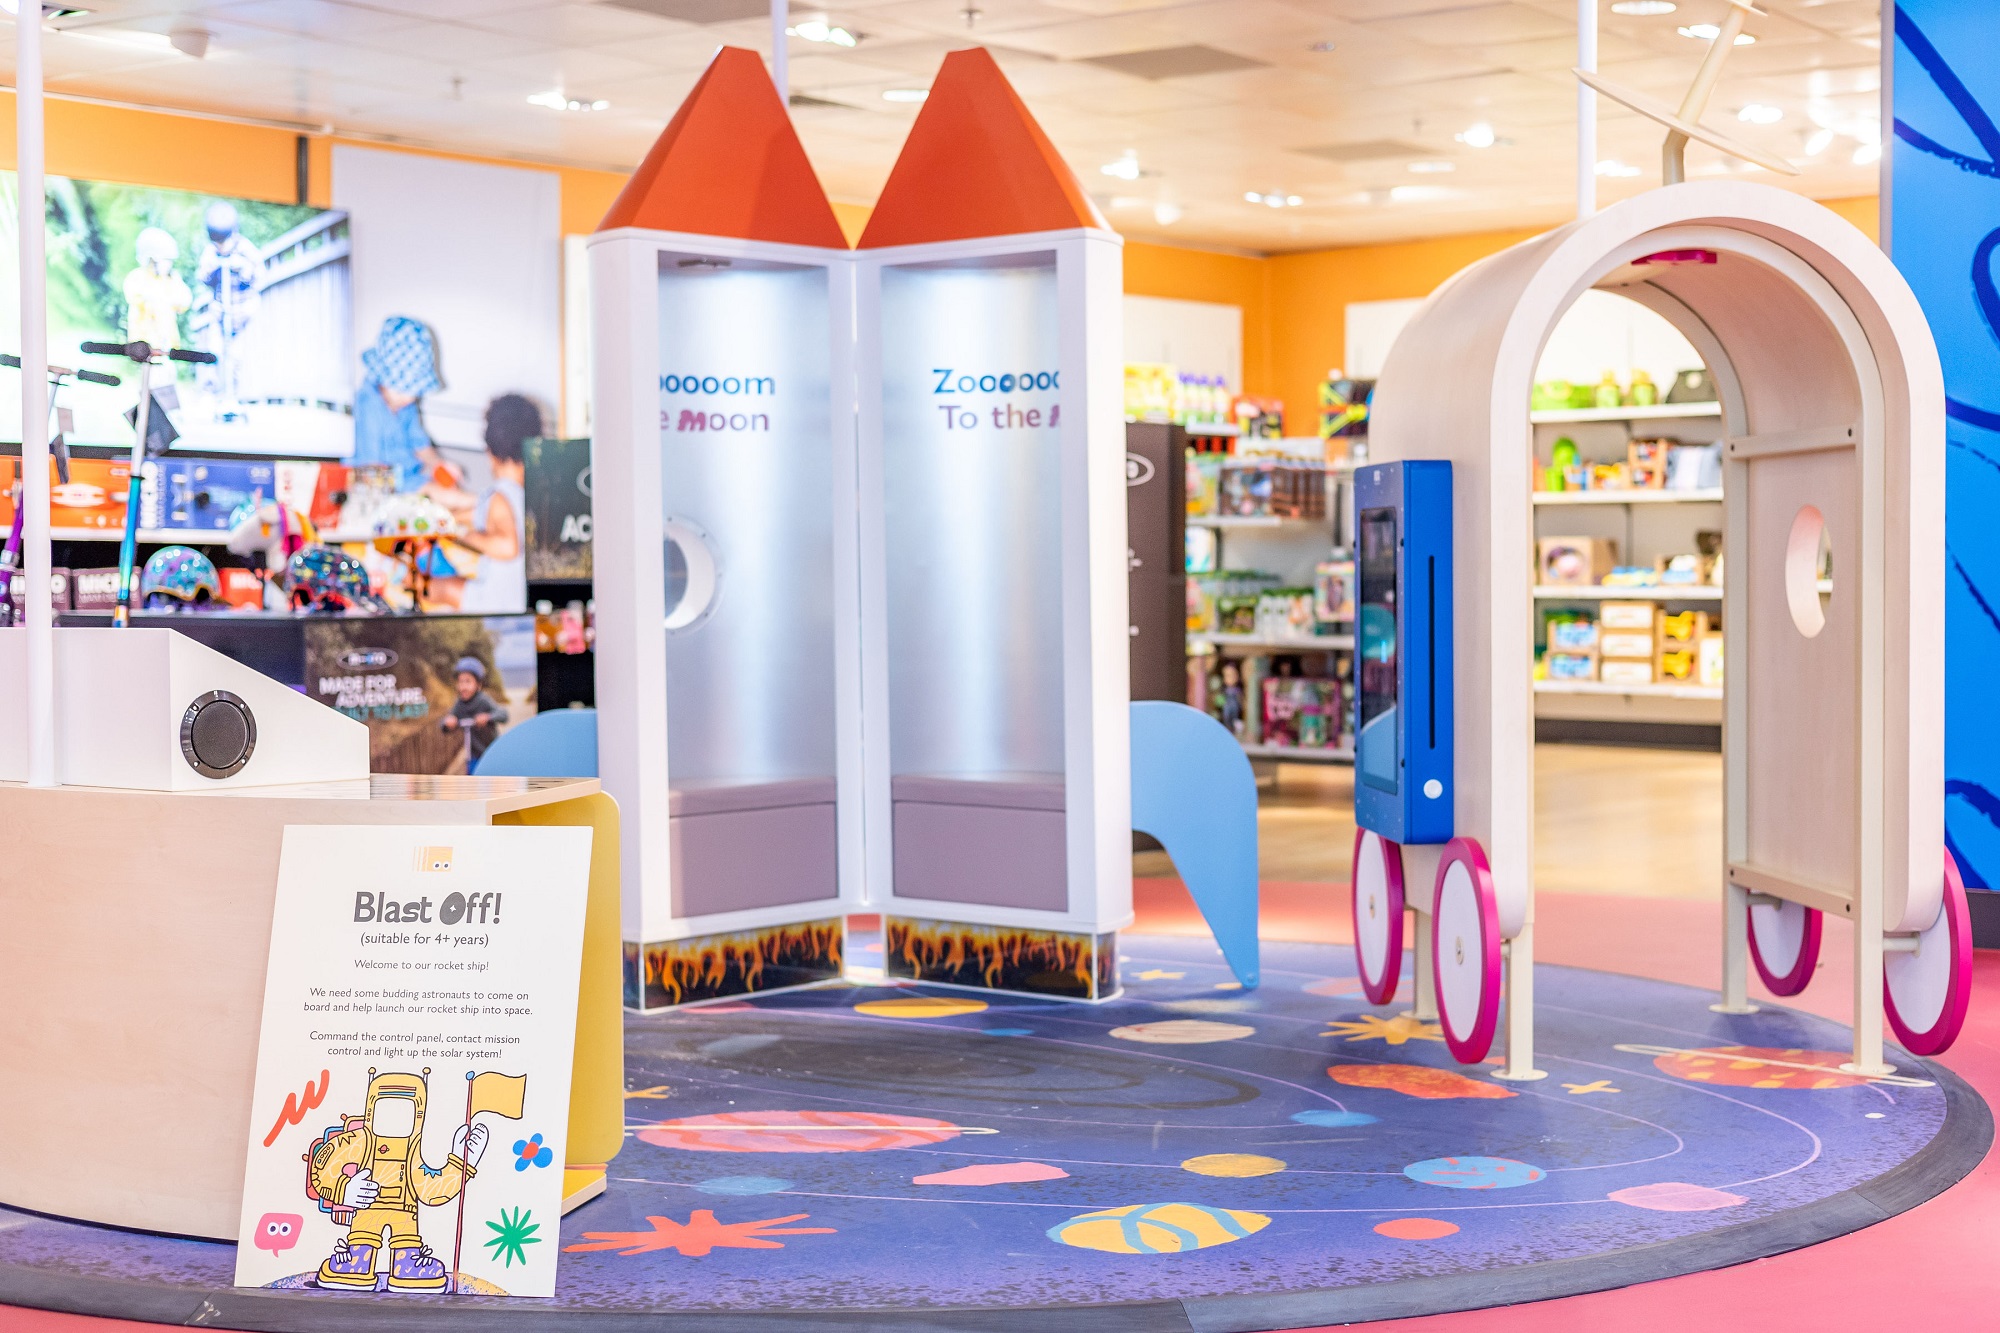 John Lewis rolls out new kidswear concept in Oxford Street flagship